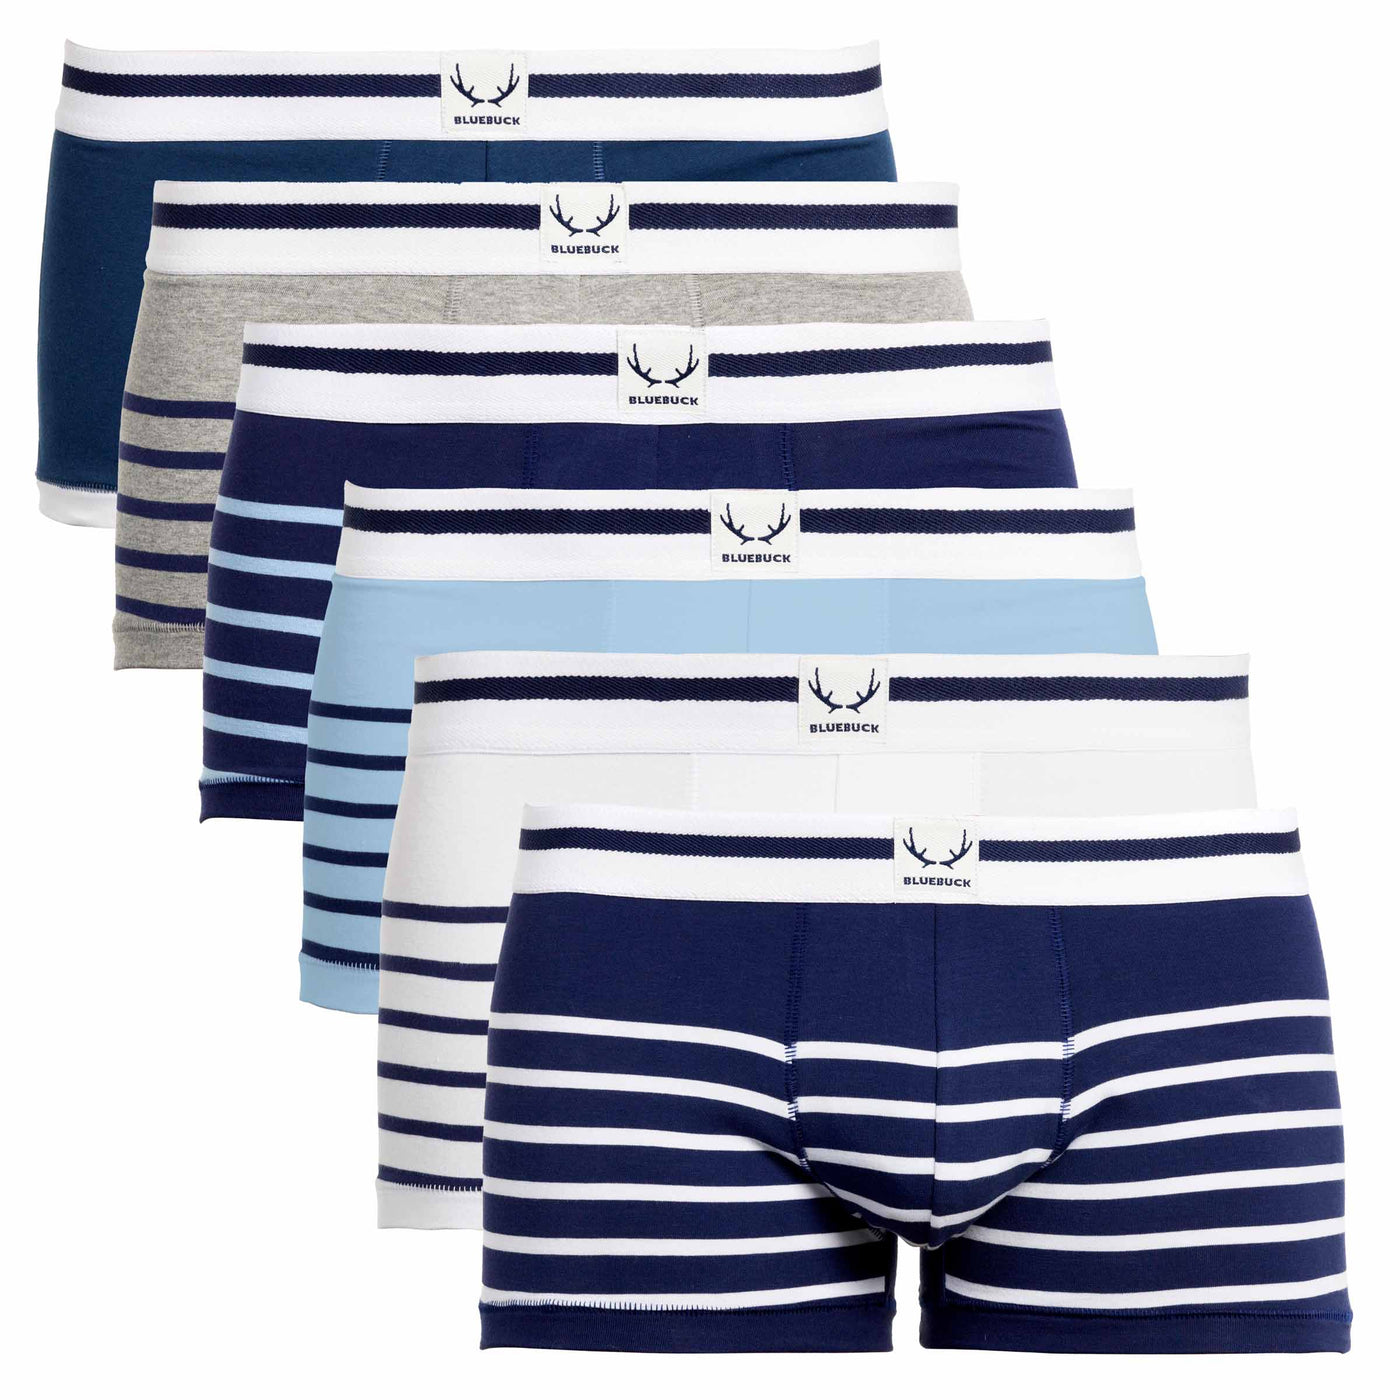 6 trunks in organic cotton for men, nautical with stripes